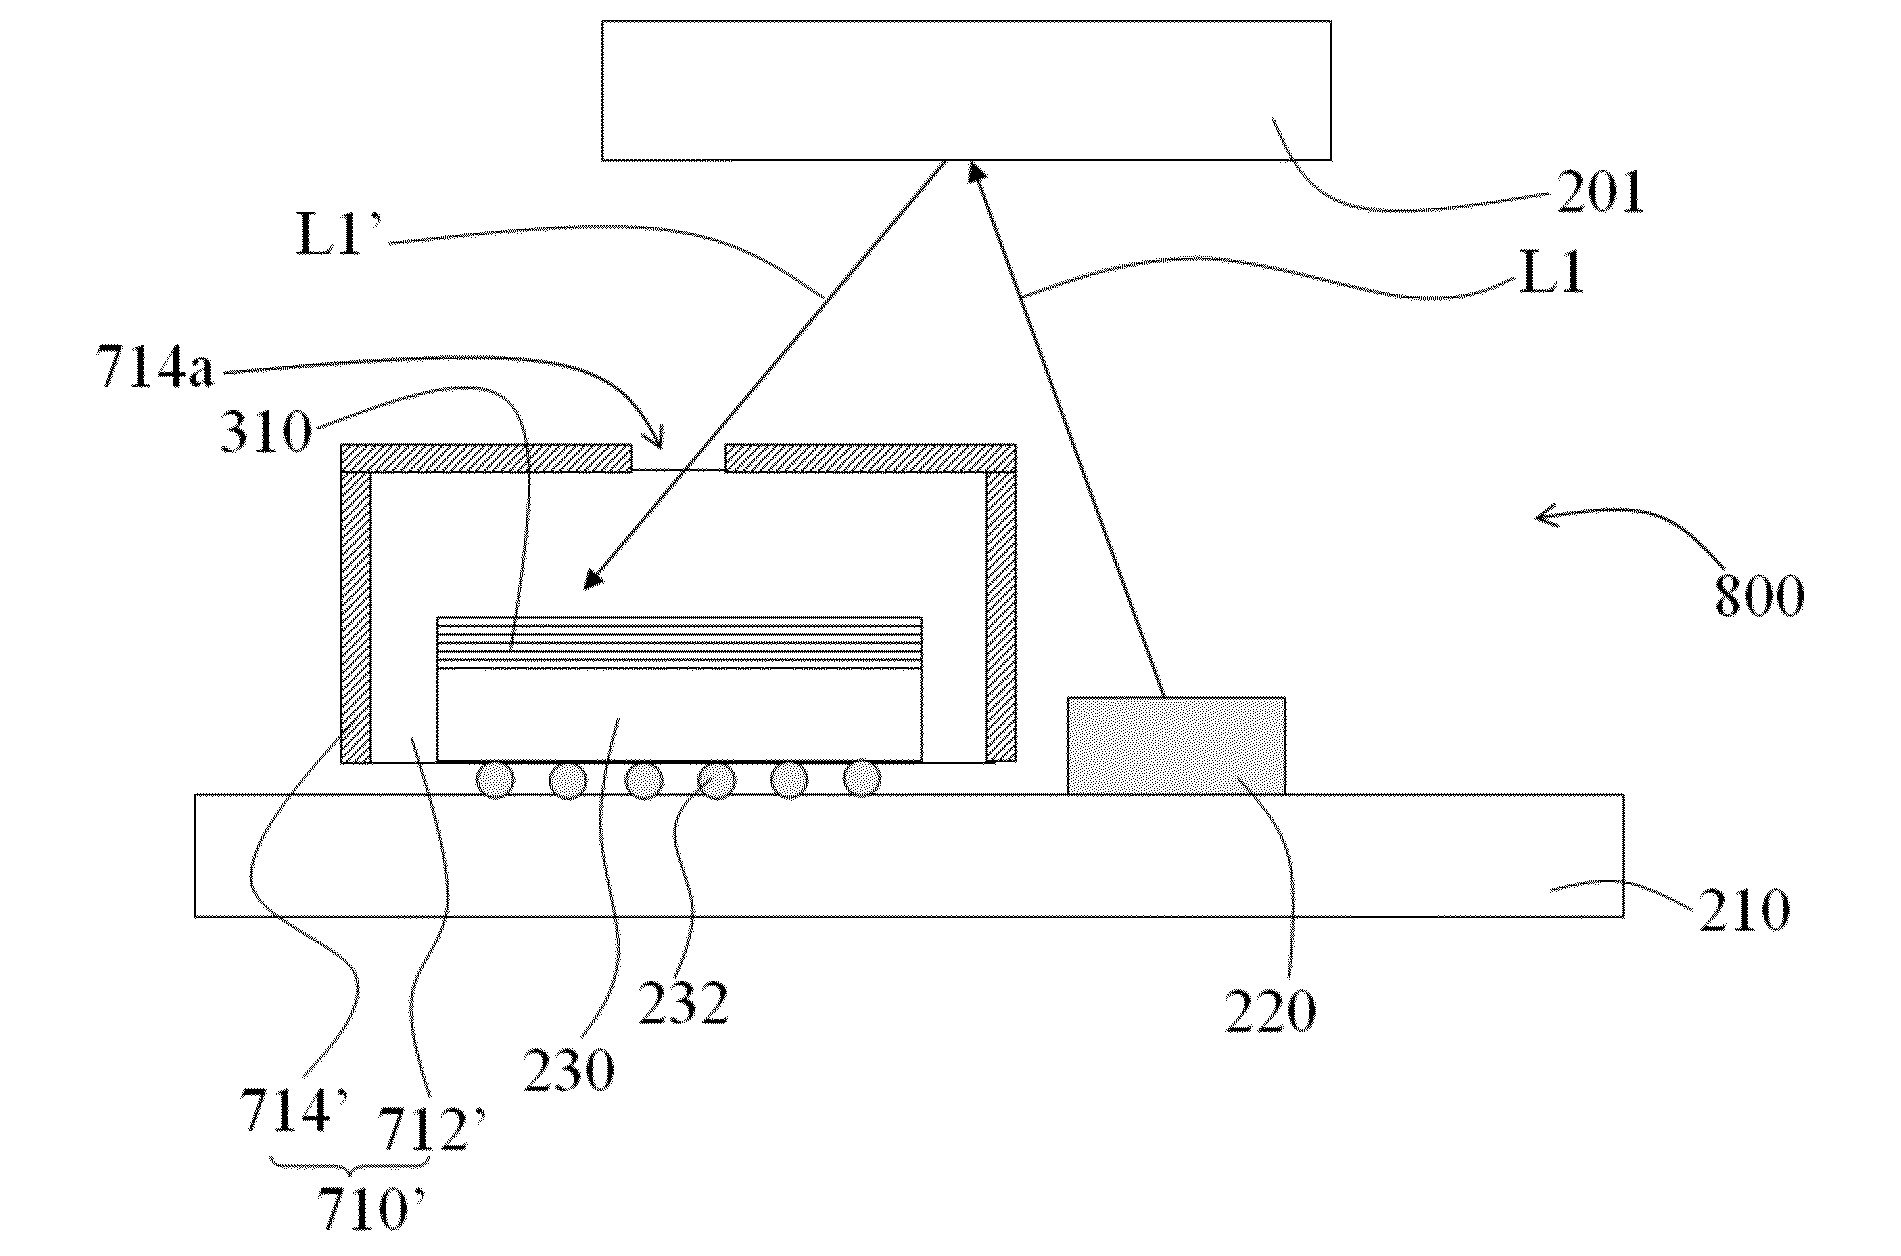 Package structure of optical apparatus